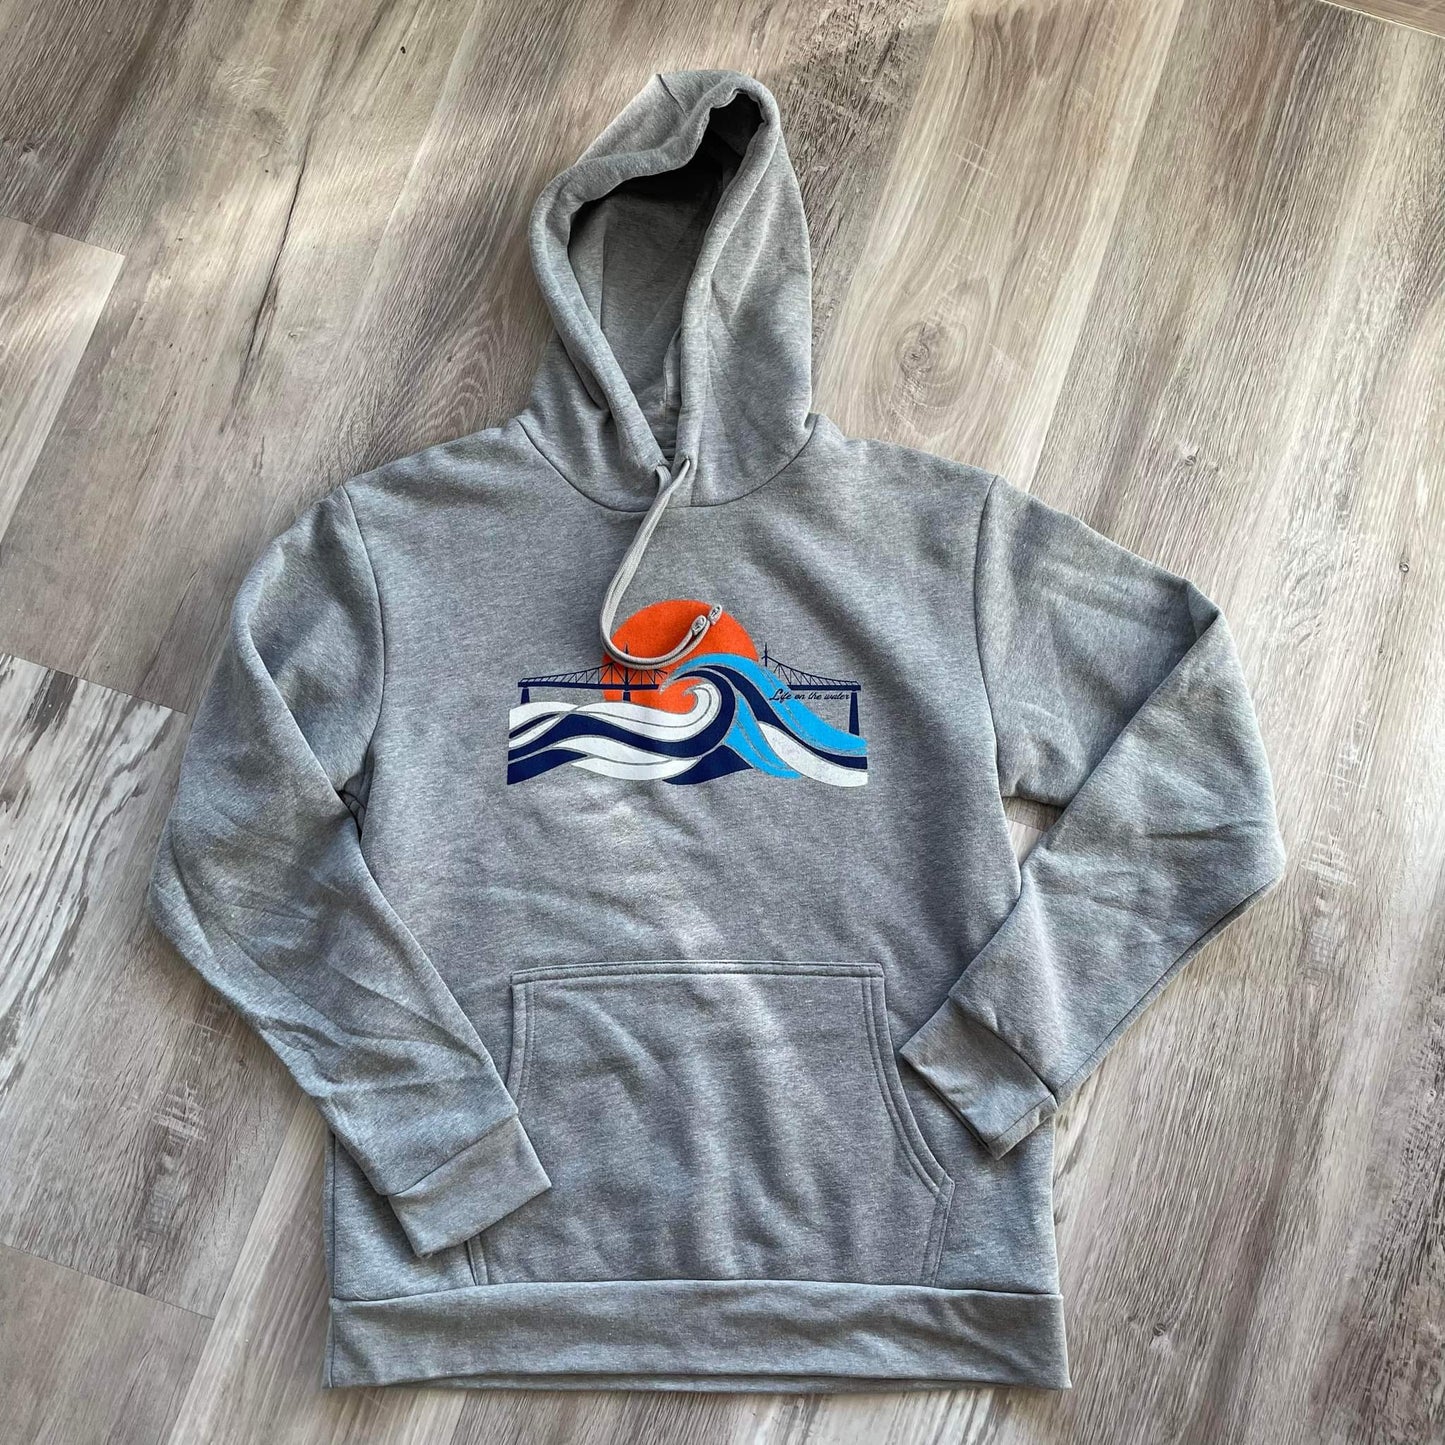 Life On The Water 20'/21' Design - Hoodies